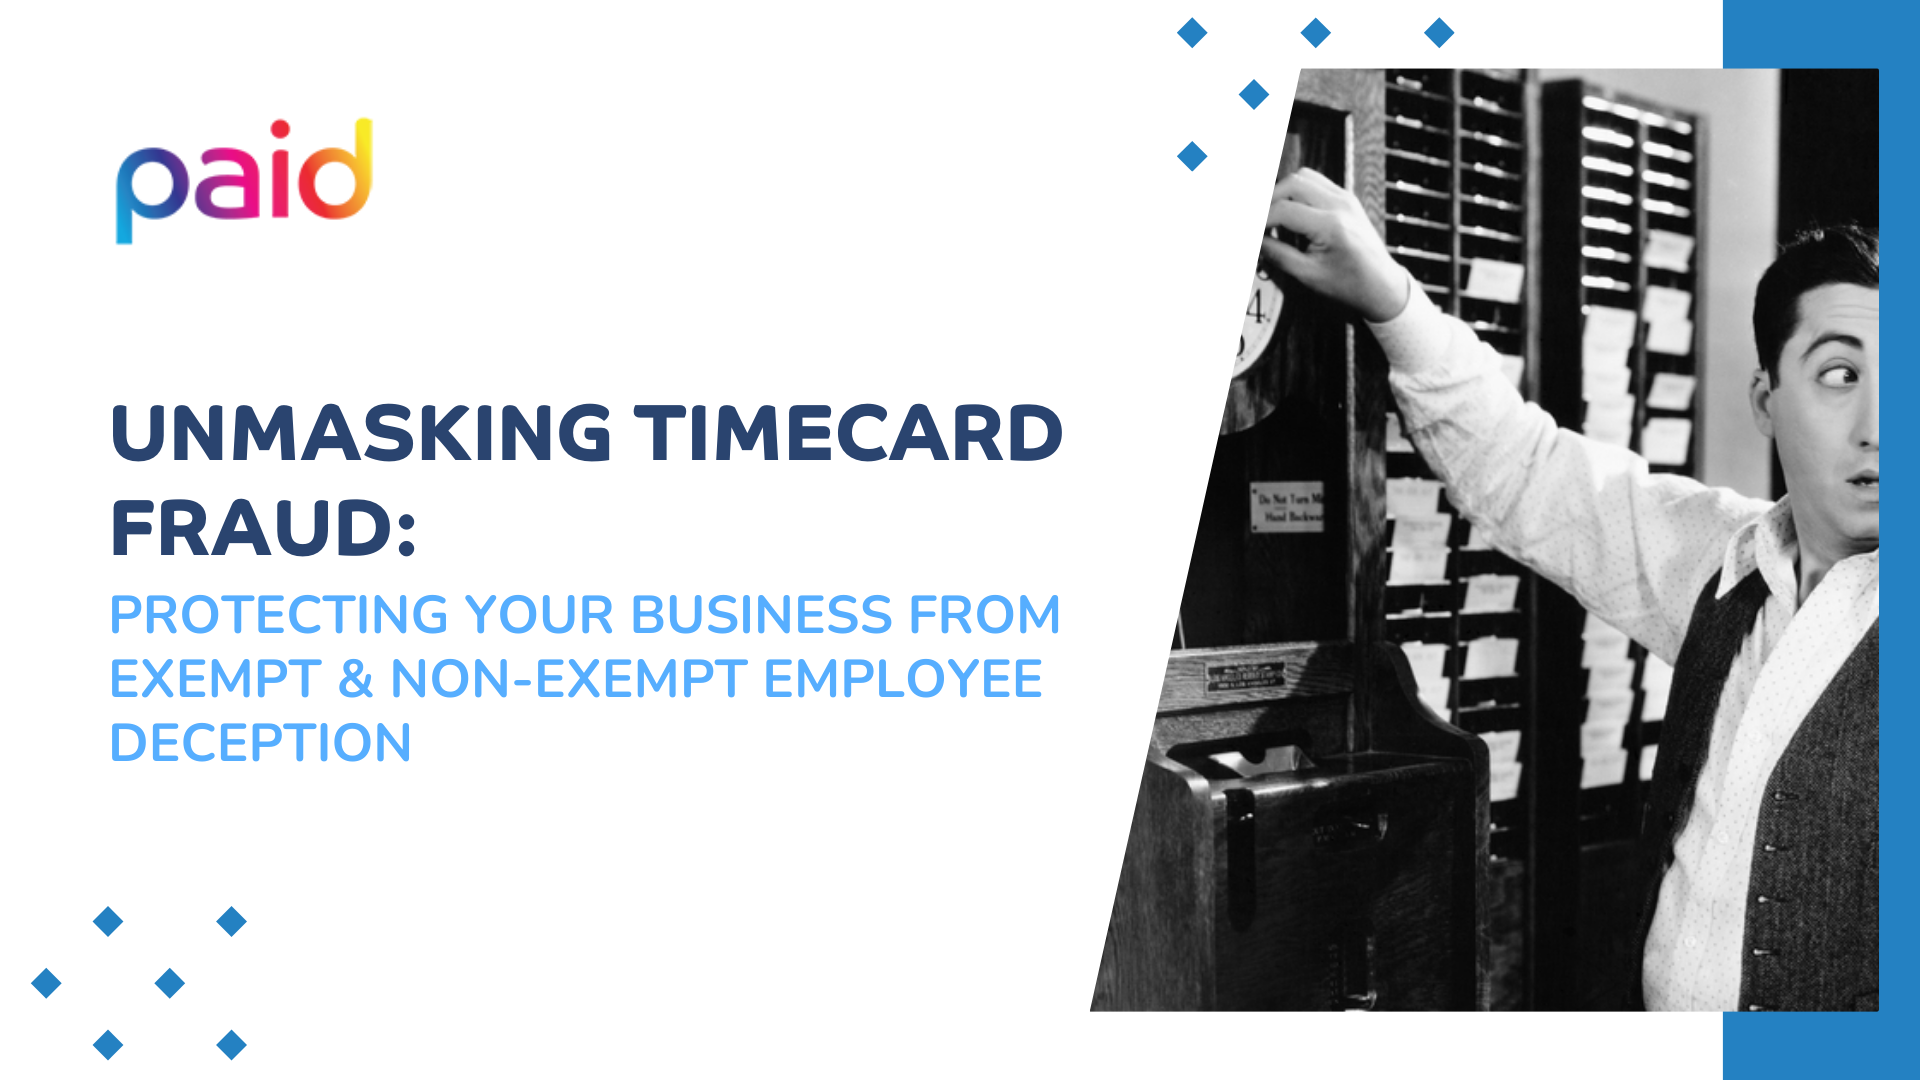 Unmasking Timecard Fraud: Protecting Your Business from Exempt and Non-Exempt Employee Deception